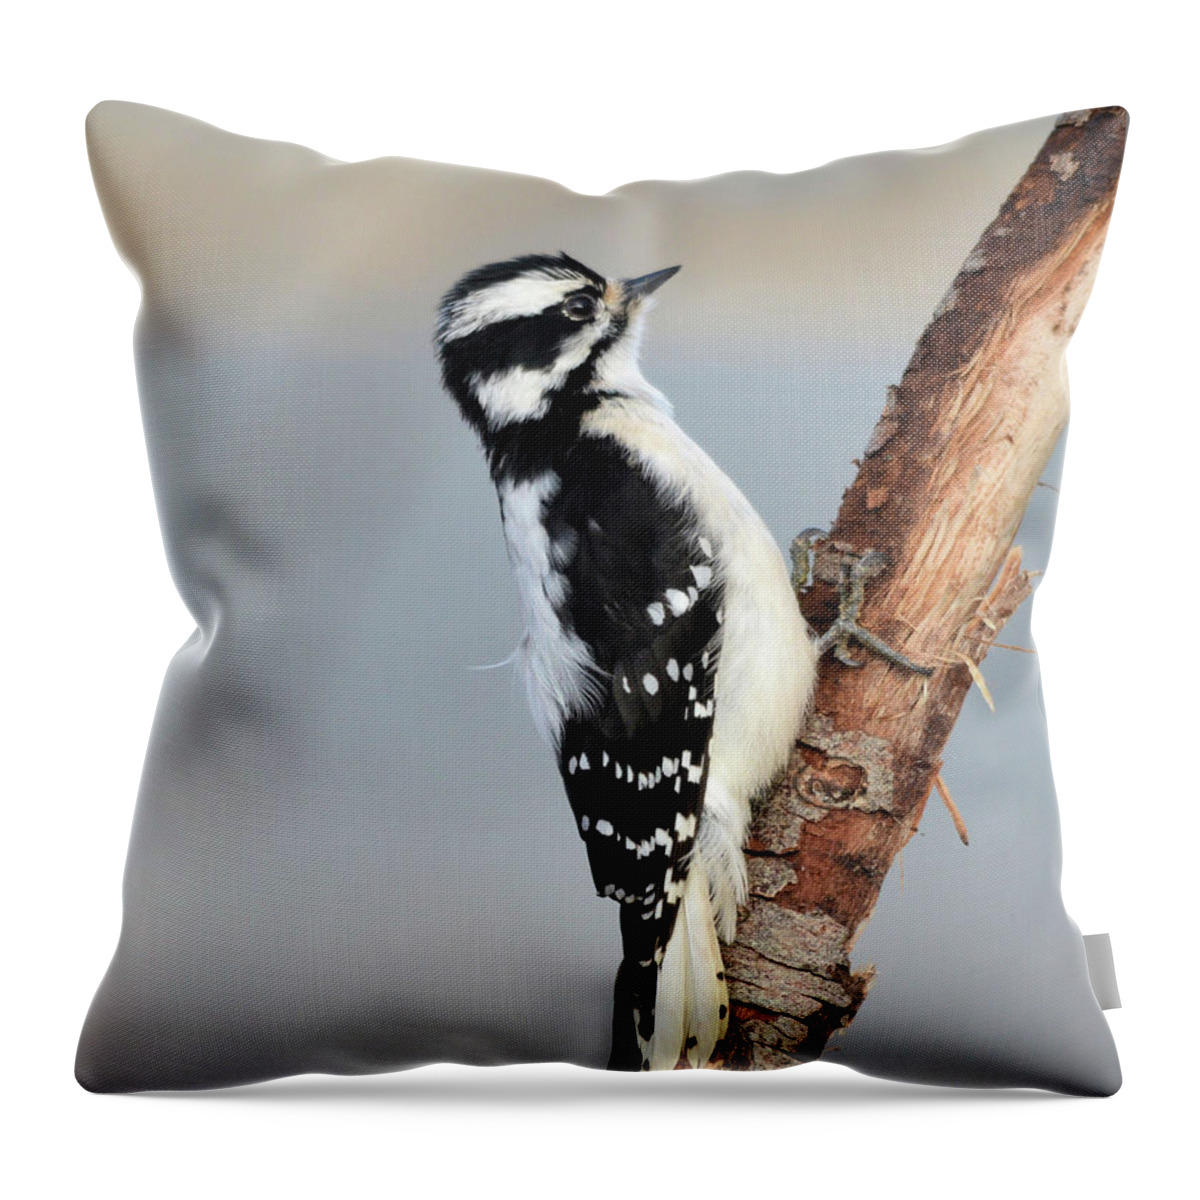 Downy Woodpecker Throw Pillow featuring the photograph Downy Woodpecker by Whispering Peaks Photography